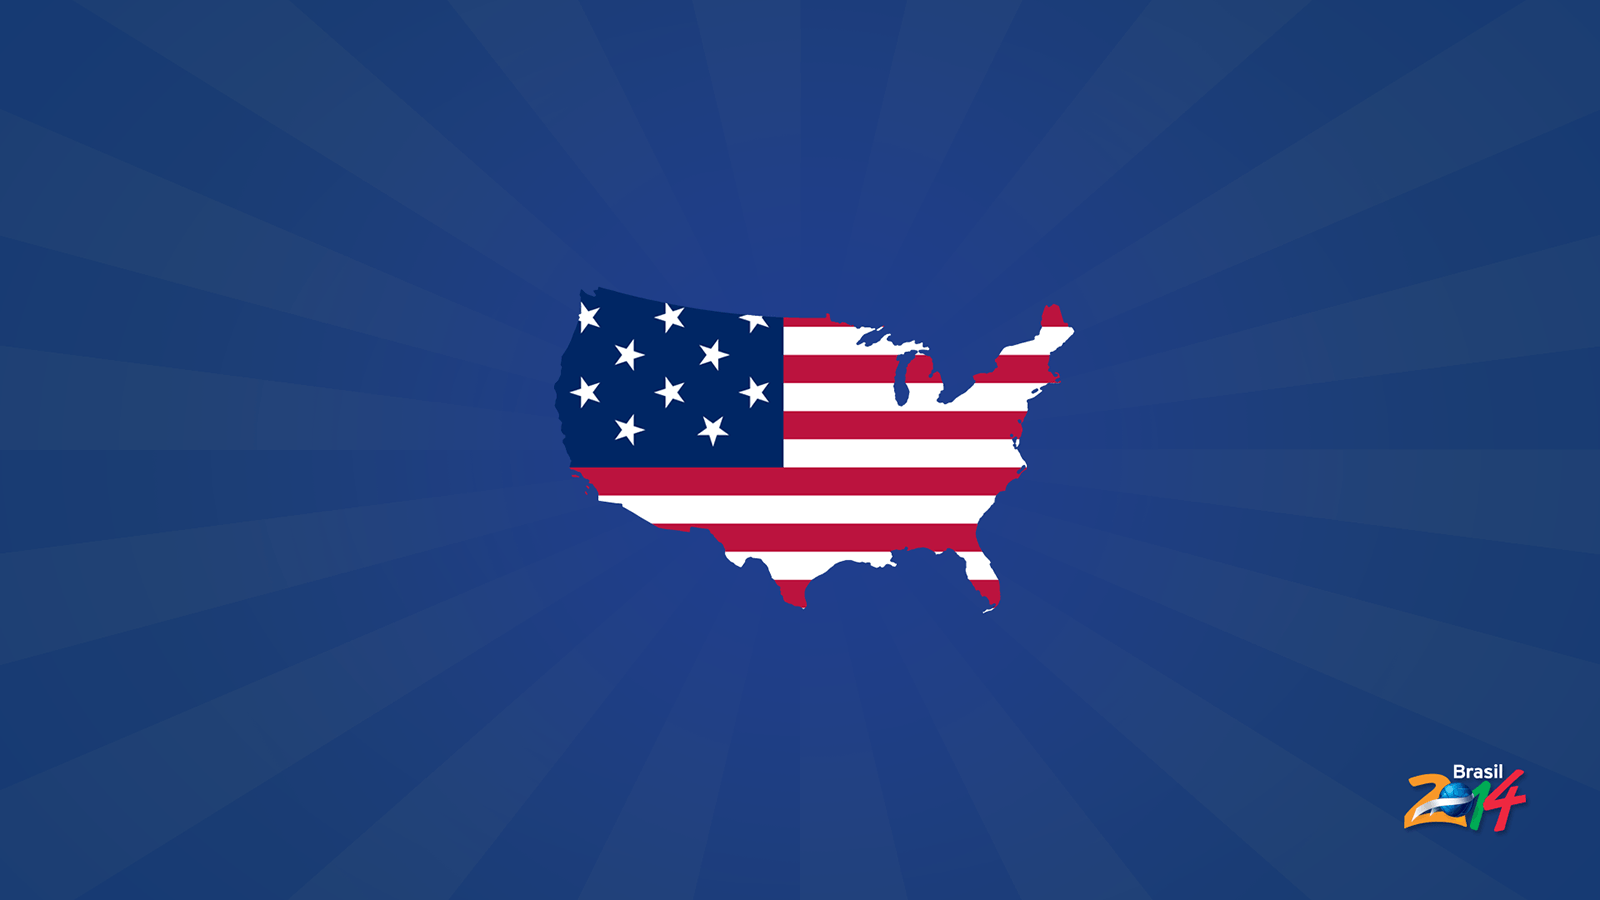 United states of america wallpaper HD Gallery